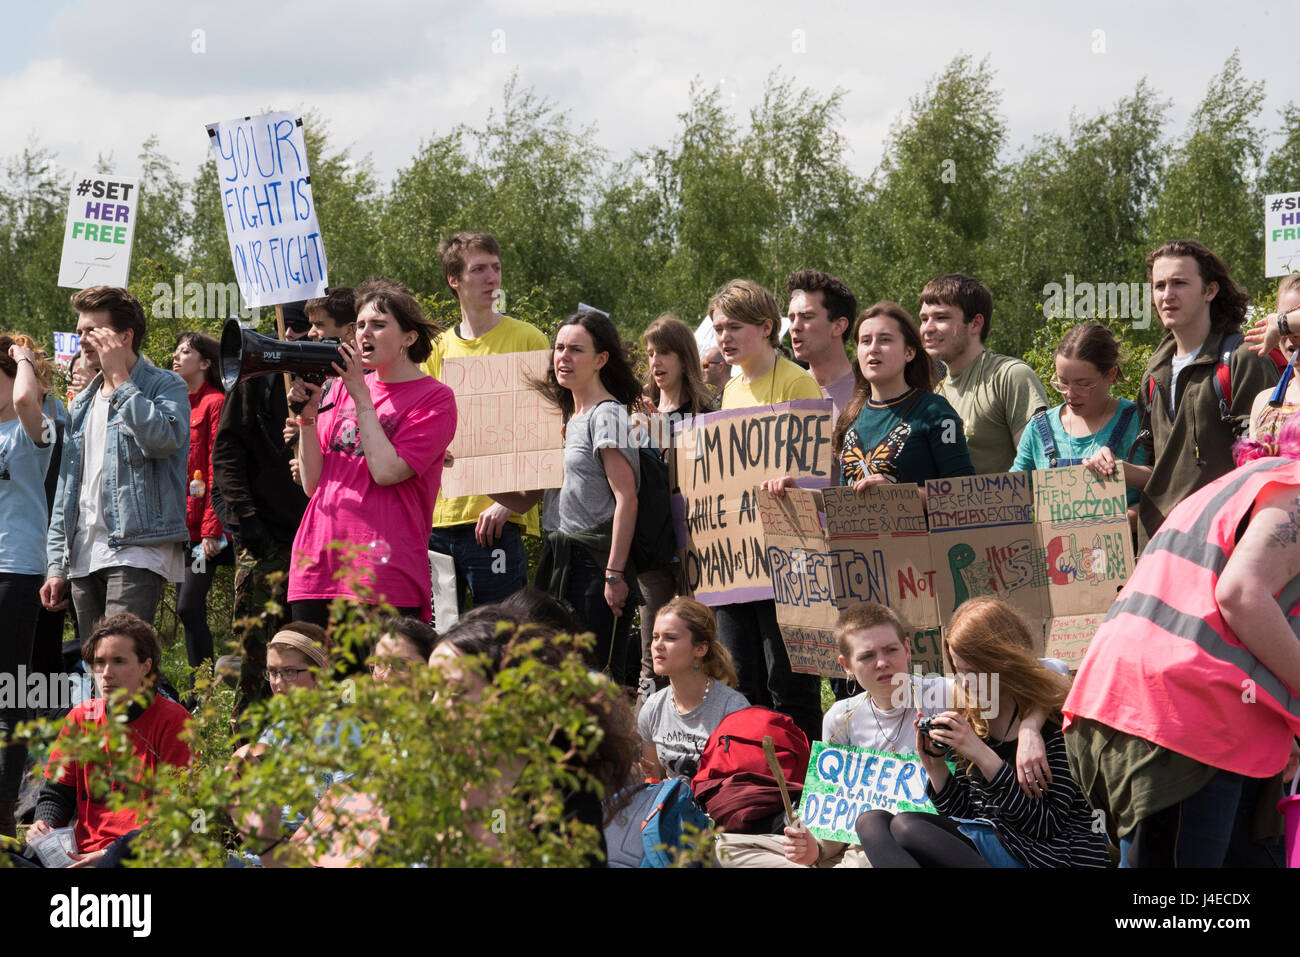 Bedfordshire, UK. 13th May 2017. Several hundred protesters have gathered at the Yarl's Wood Immigration Detention Centre in Bedfordshire to demand its closure. Police facilitated the protest to allow protesters to gather at a main perimeter fence which is normally closed to the public. Credit: Peter Manning / Alamy Live News Stock Photo